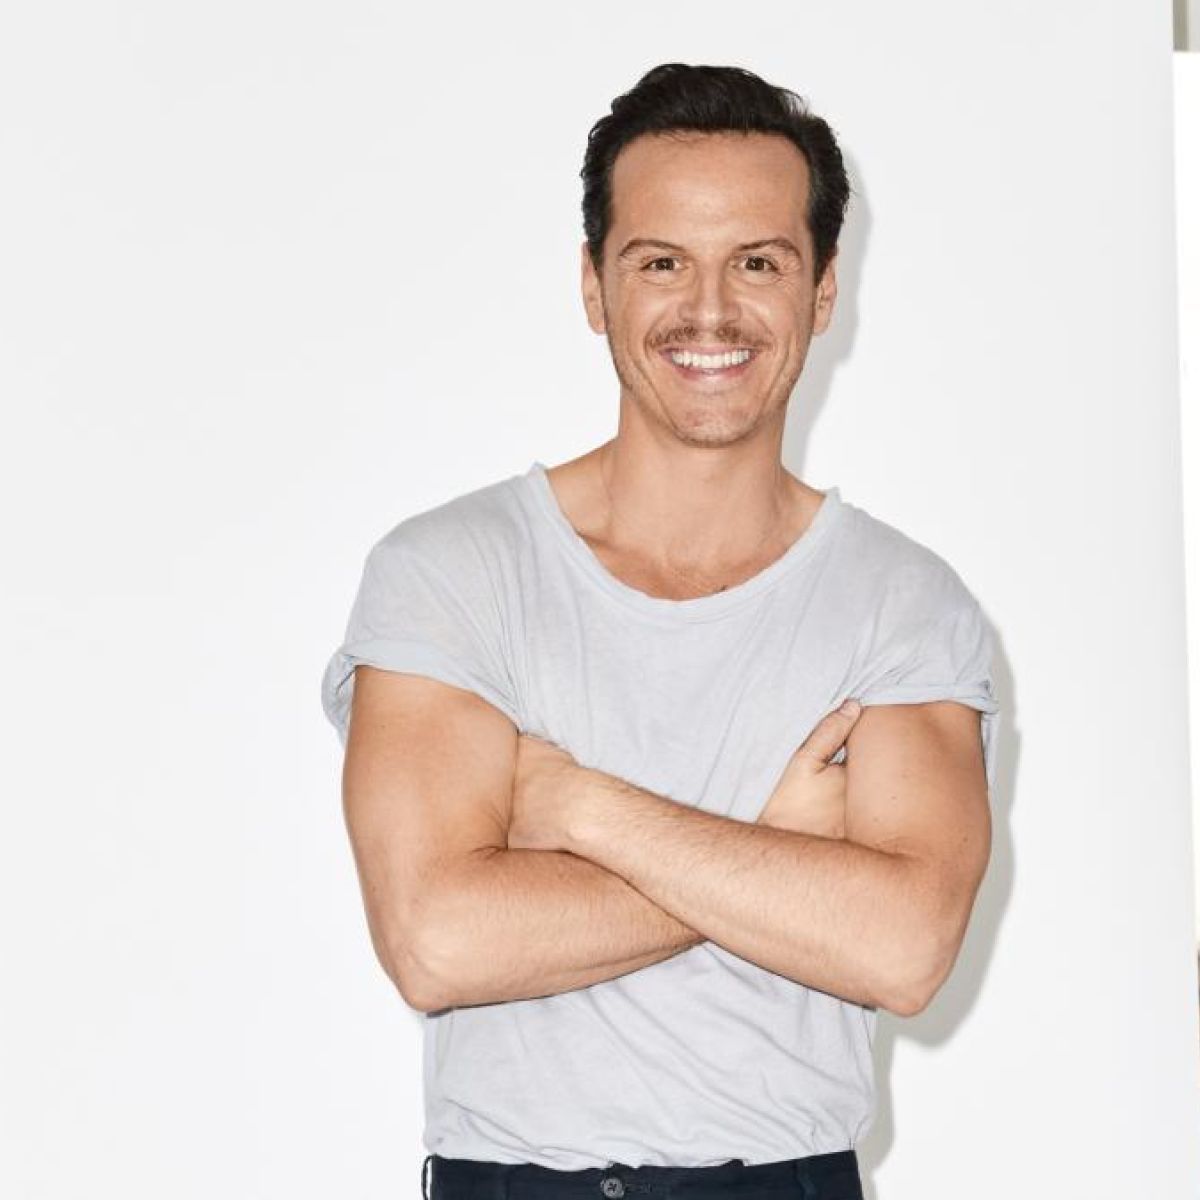 Hornet users are talking about actor Andrew Scott who recently said he&apos...